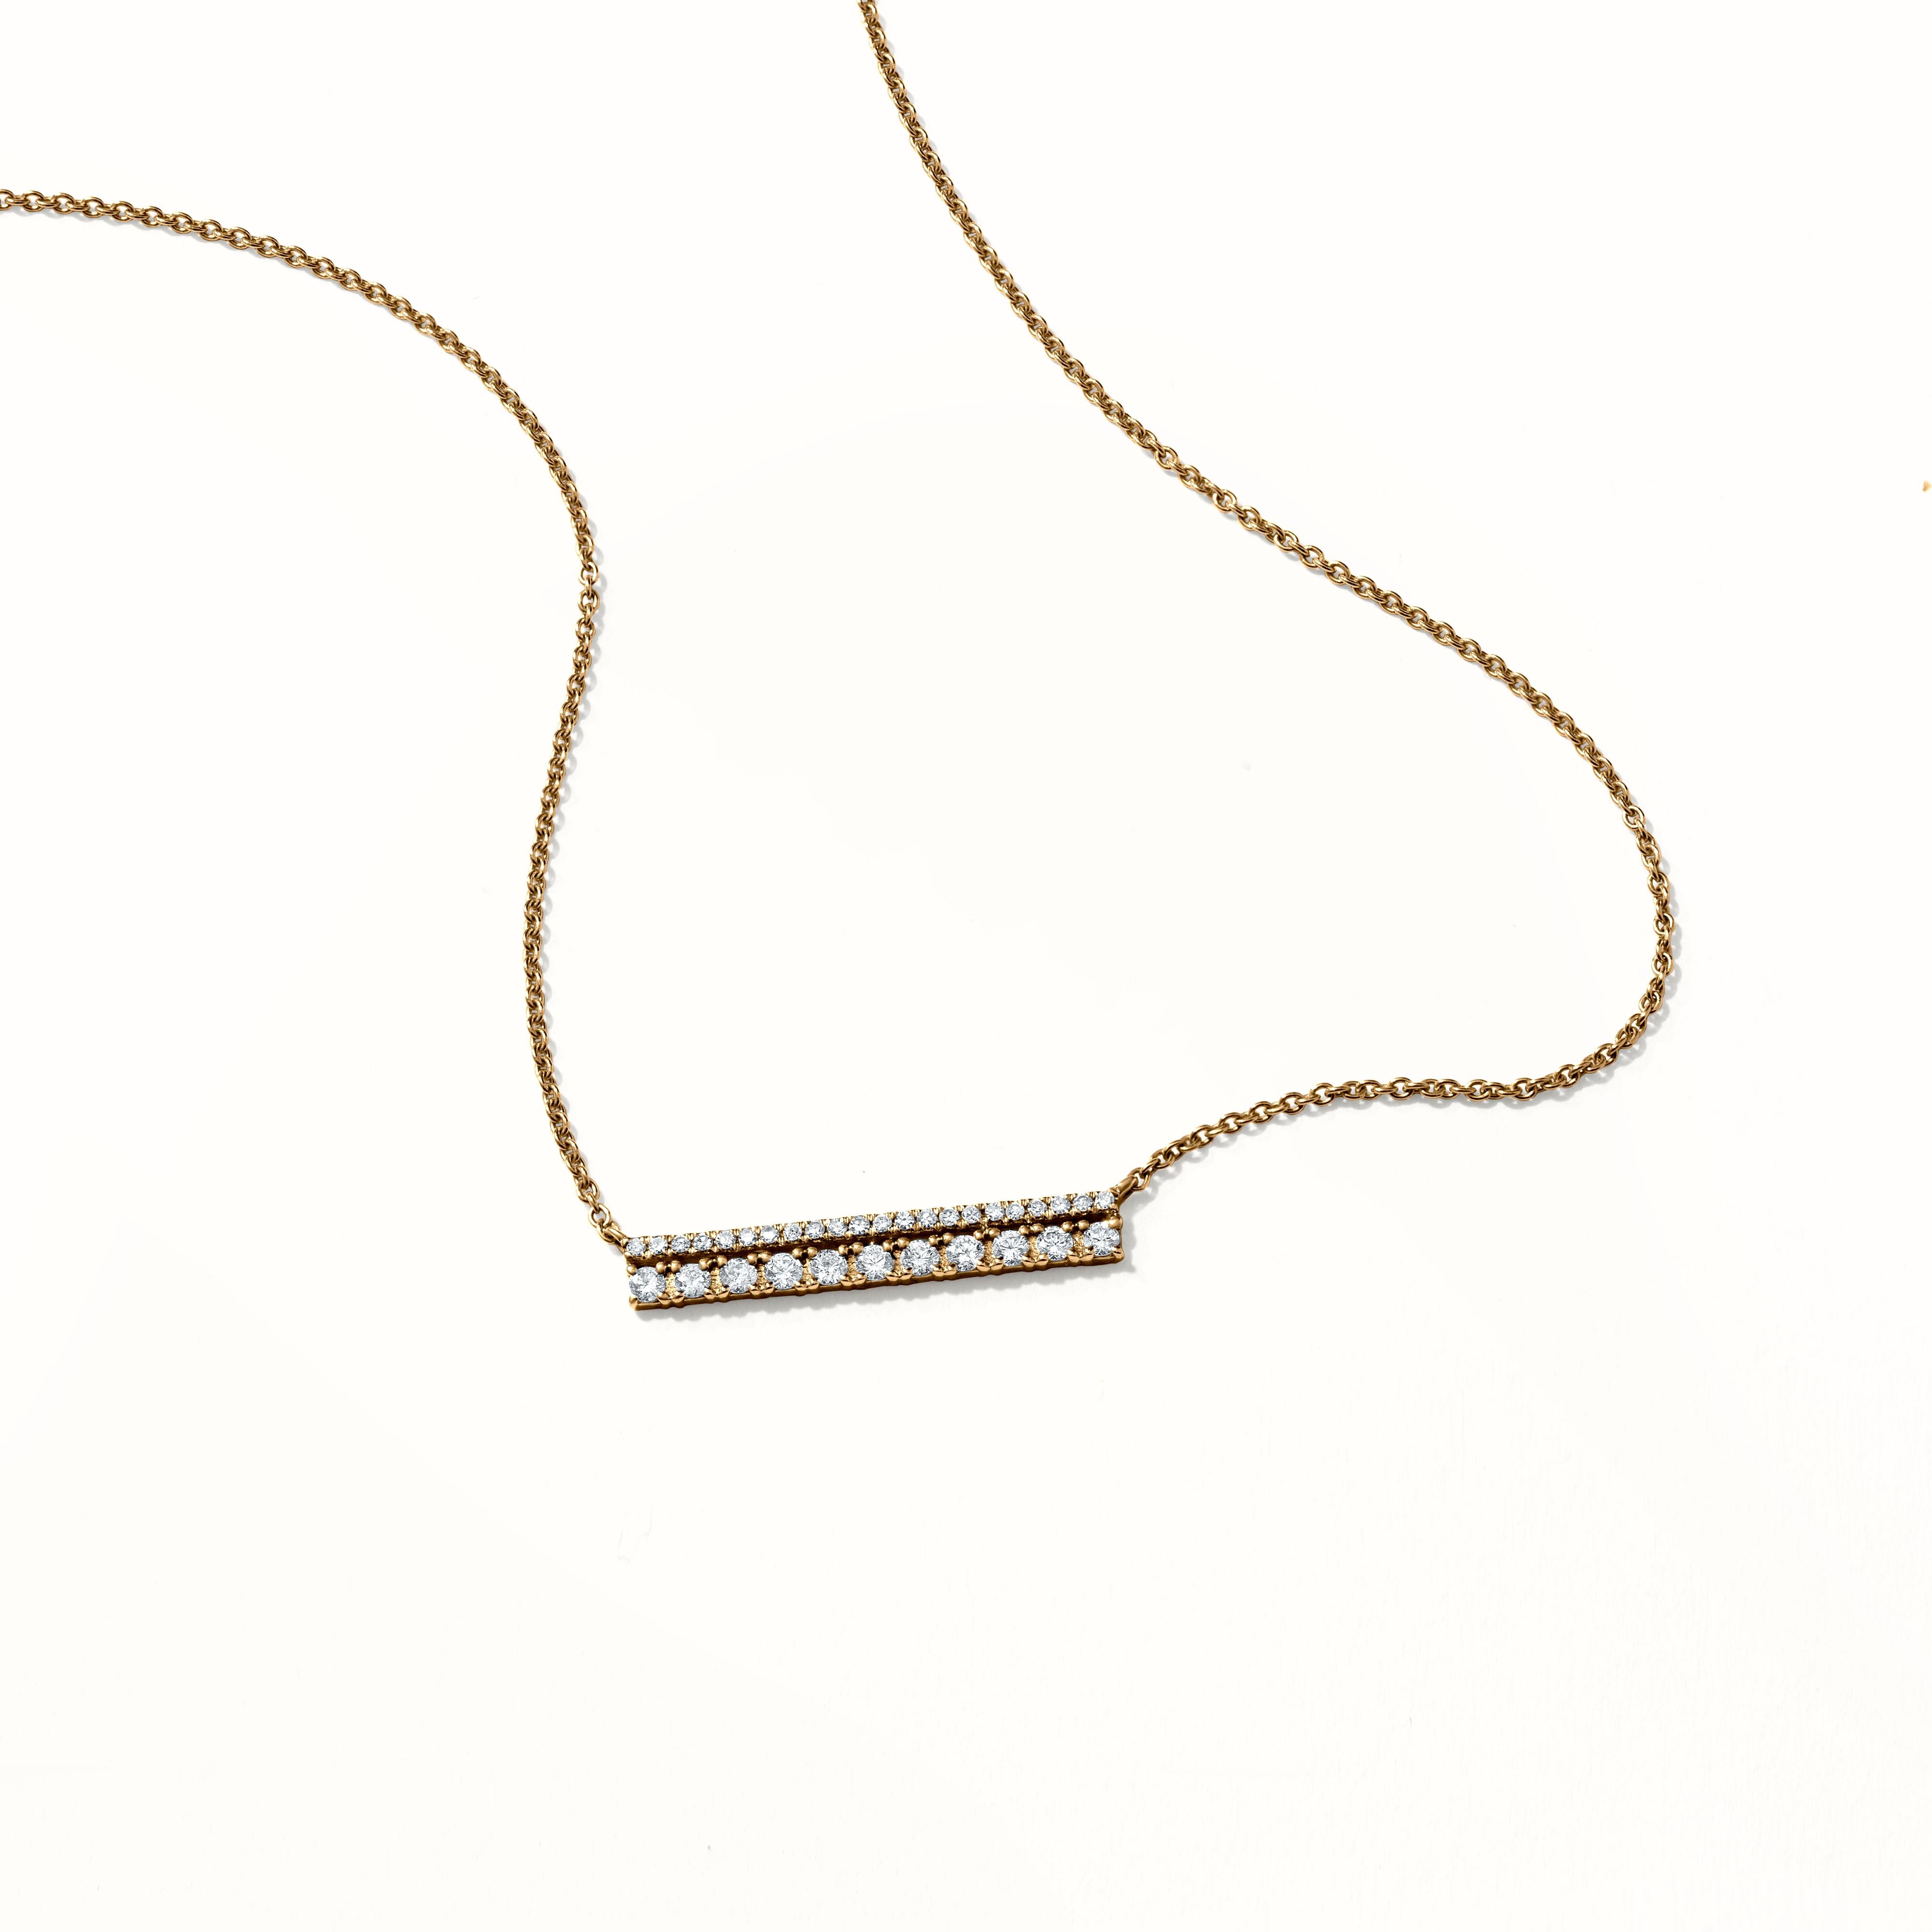 The bar pendant necklace gets a stylish twist. Featured with 33 smaller and larger diamonds in pave. Crafted by Luxle in 18K yellow gold the hanging length is 15 inches.

Please follow the Luxury Jewels storefront to view the latest collections &